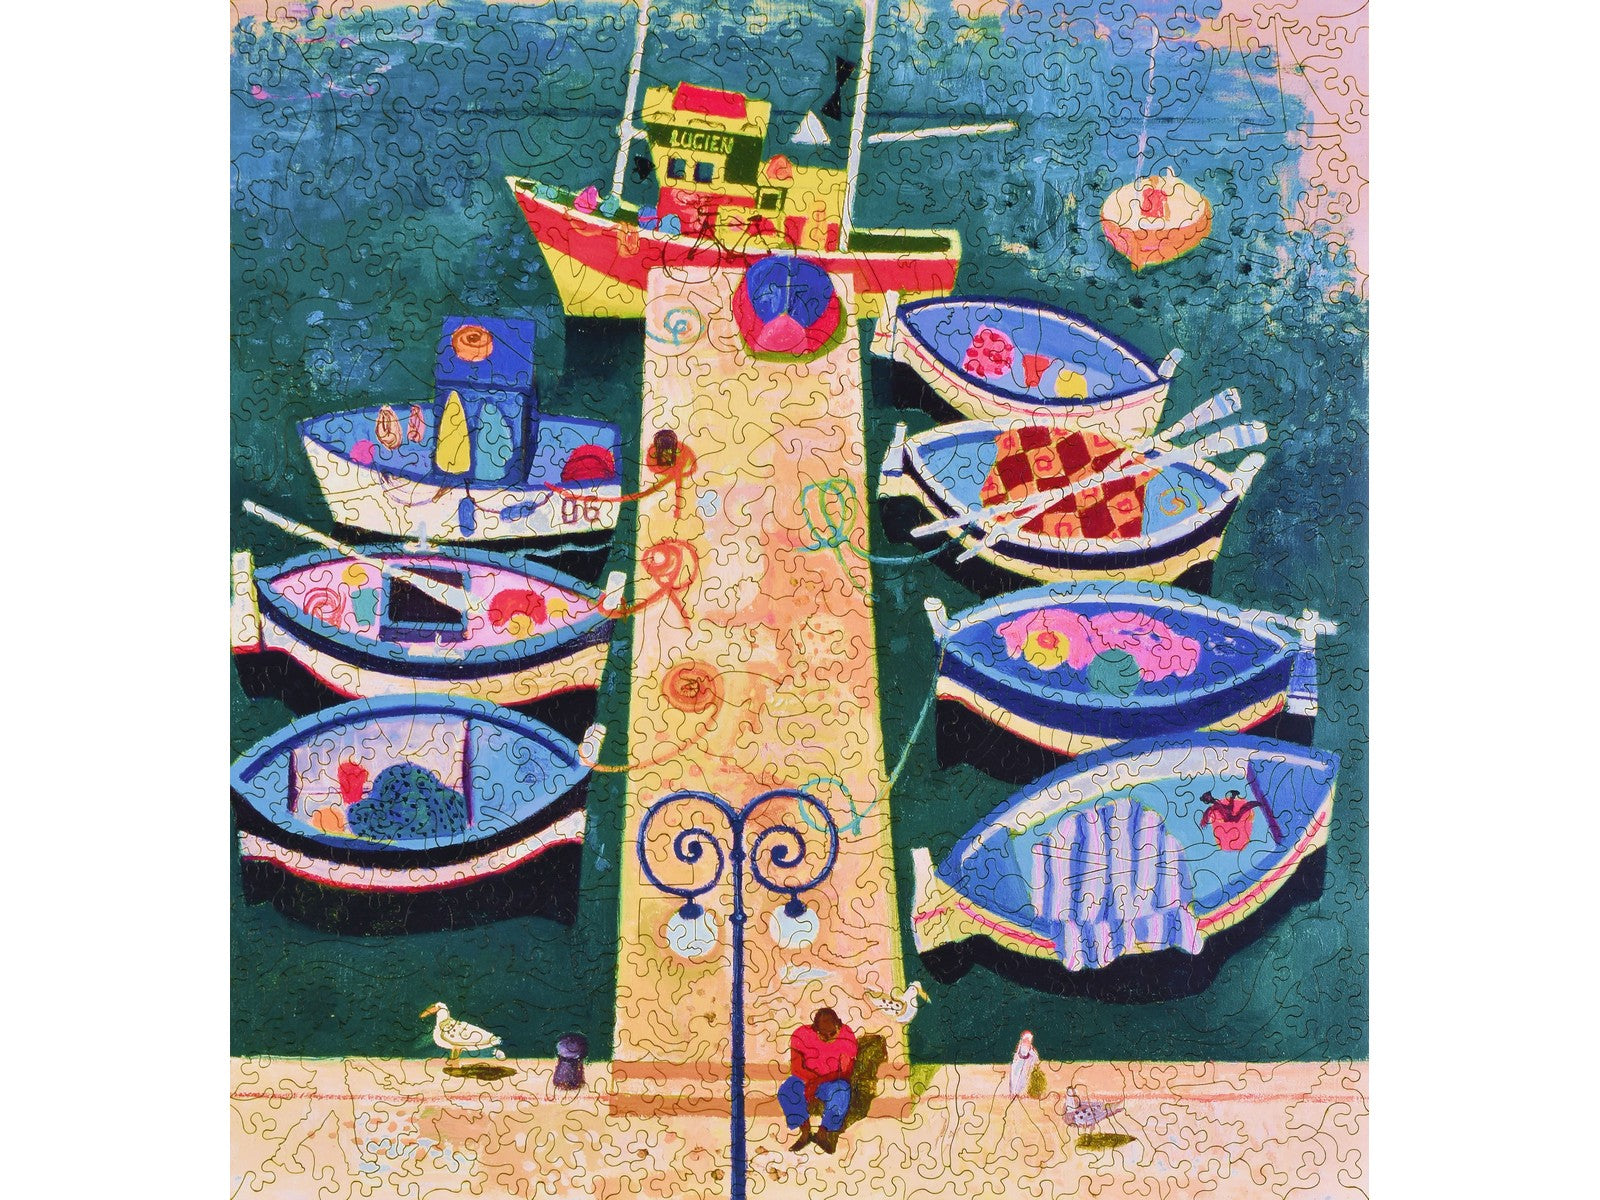 The front of the puzzle, Fisherman's Jetty, Antibes, which shows  fishing boats tied up to a pier.